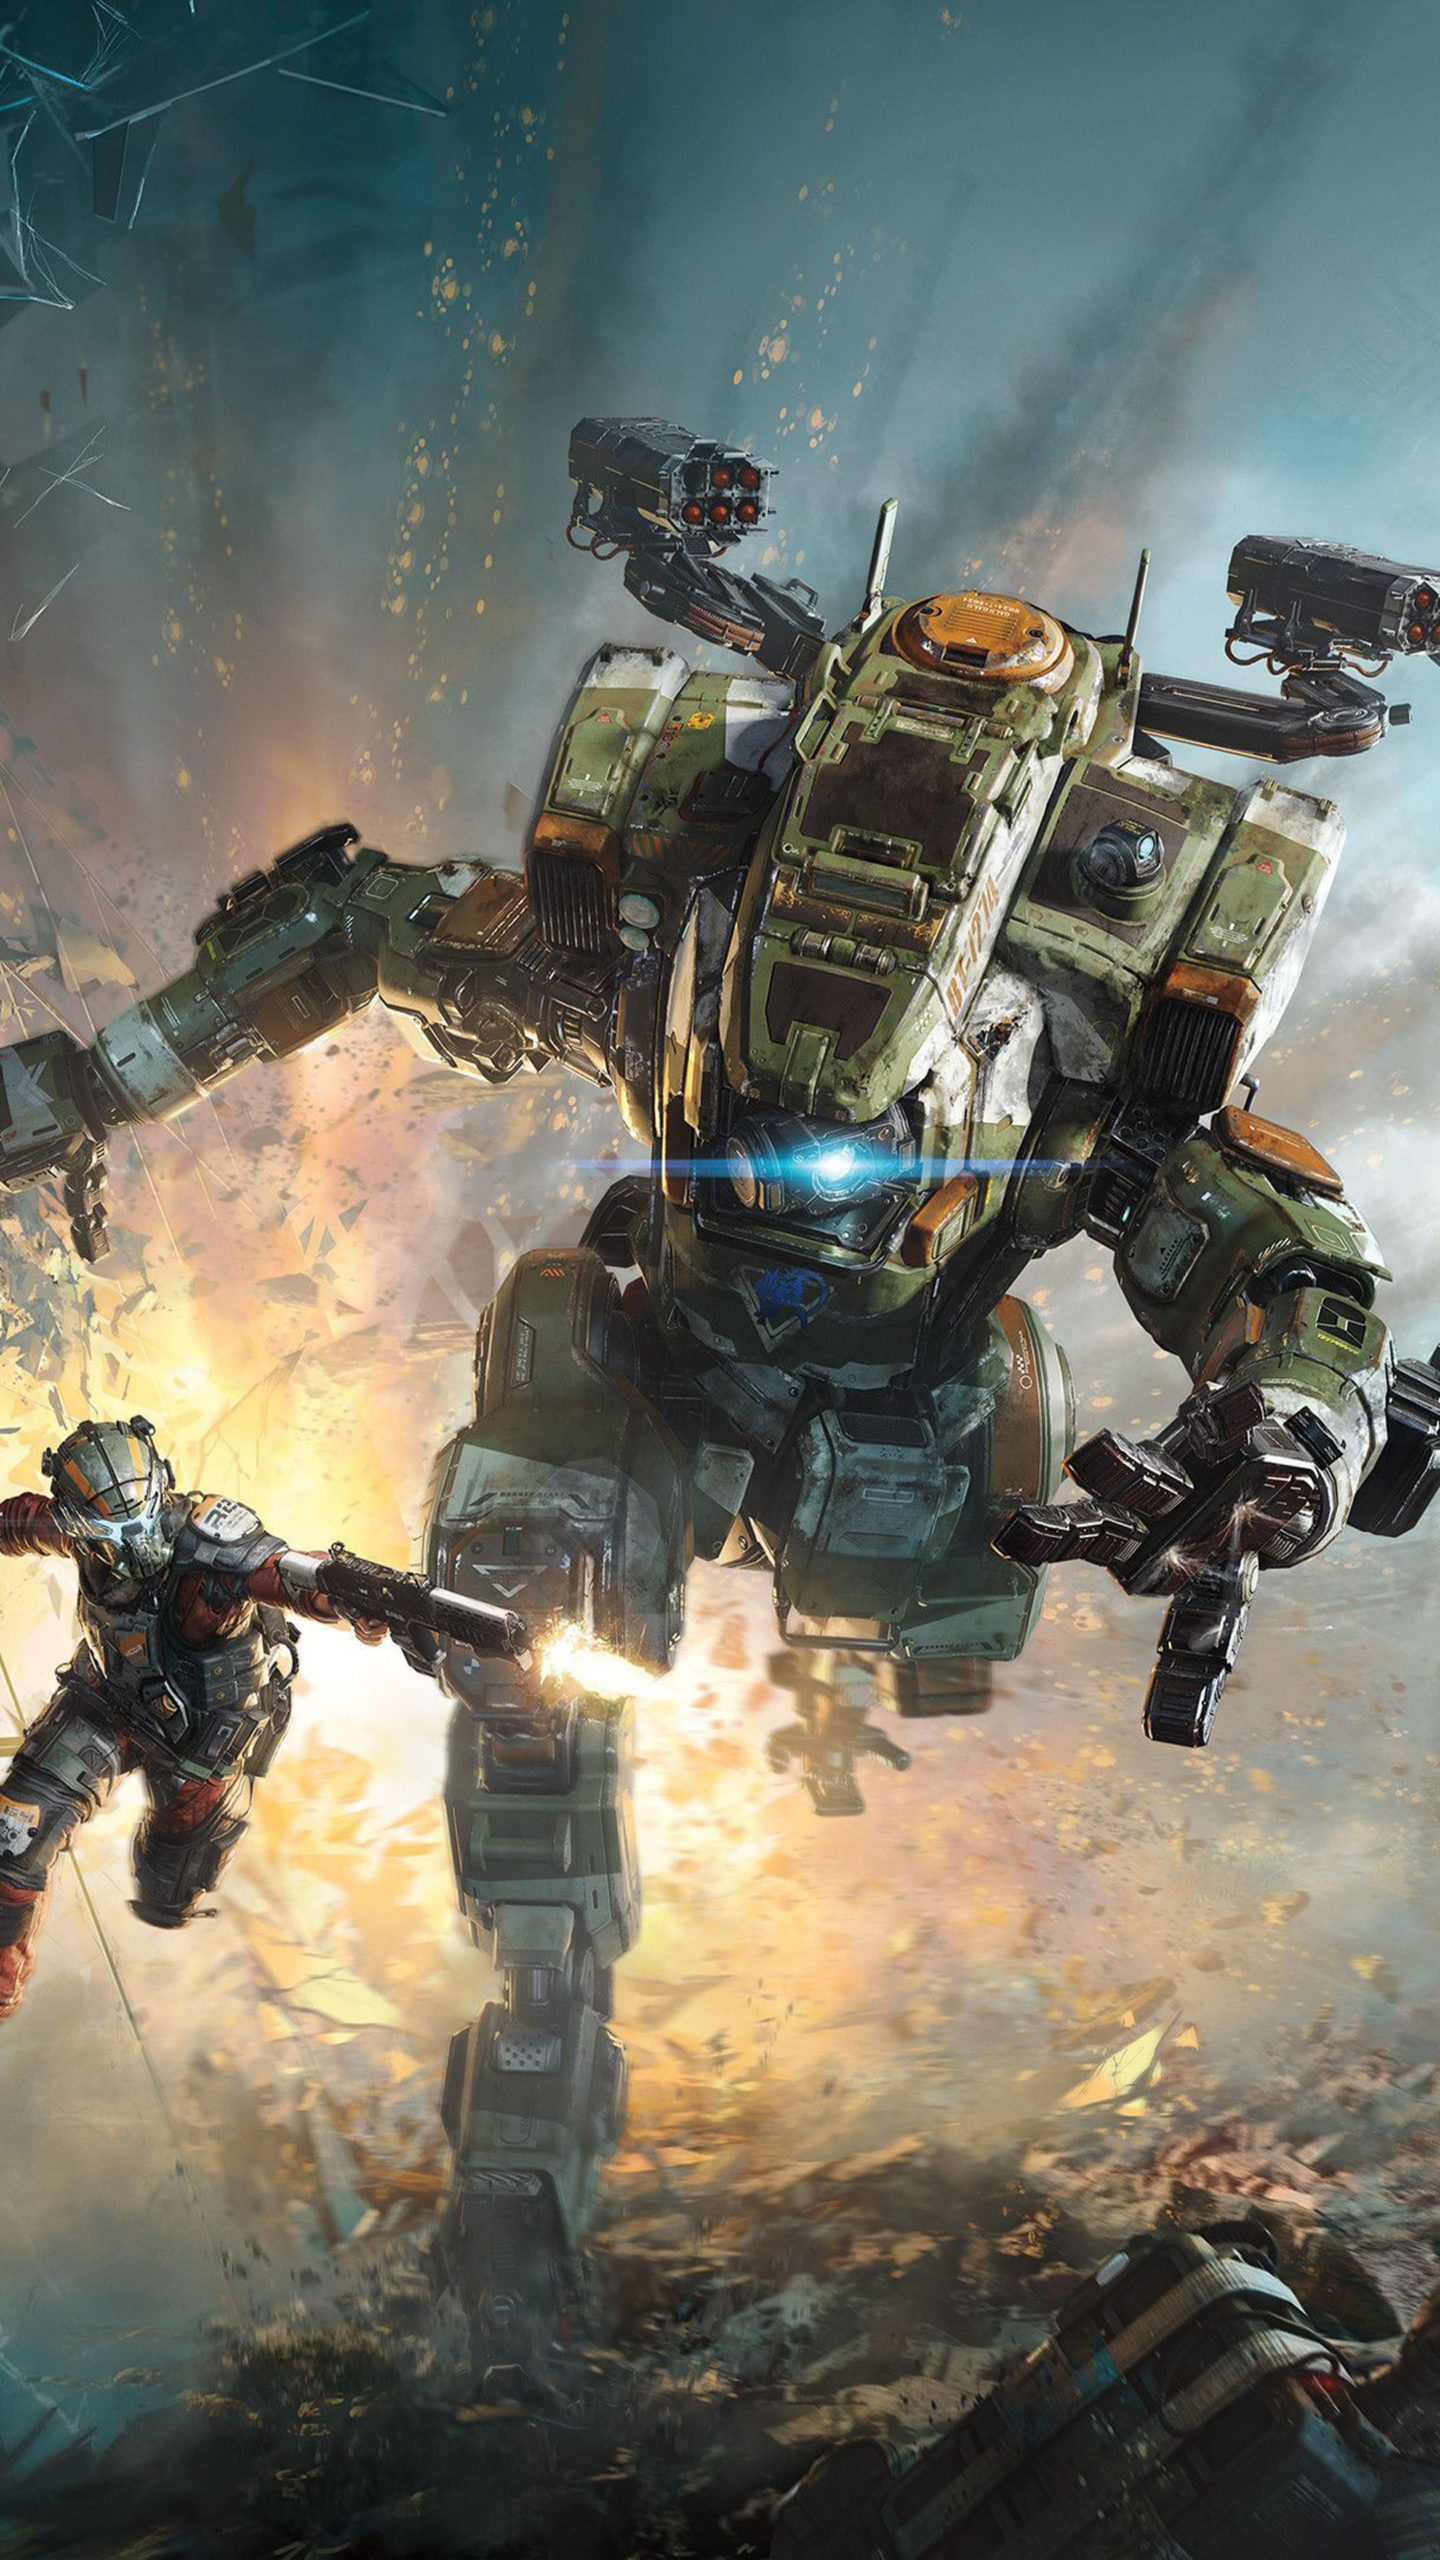 Titanfall 2 Become One 4K Wallpapers  HD Wallpapers  ID 23127